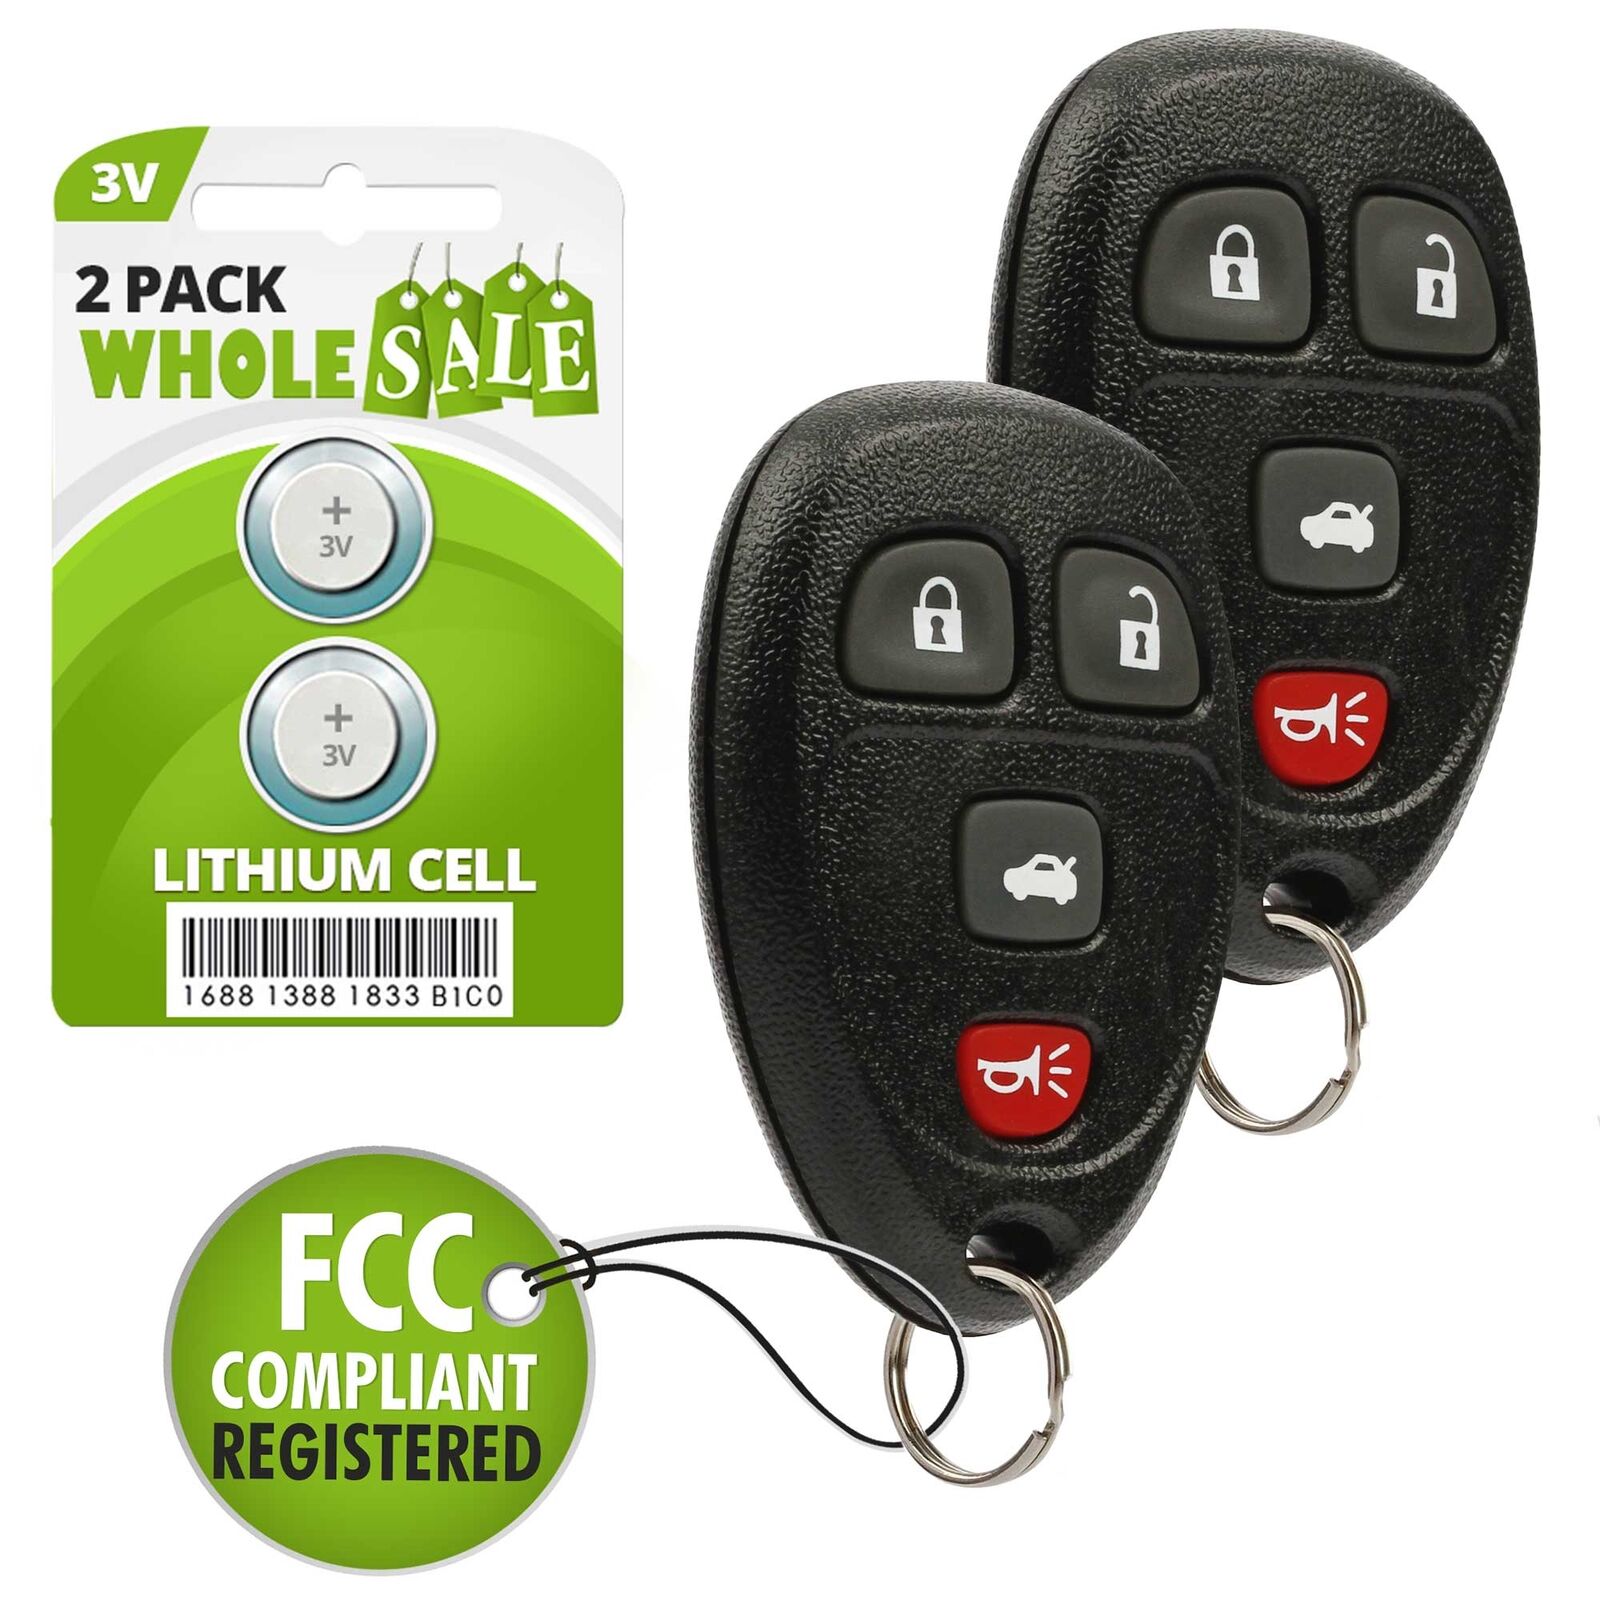 2 Replacement For 2007 2008 2009 Saturn Aura  Key Fob Remote